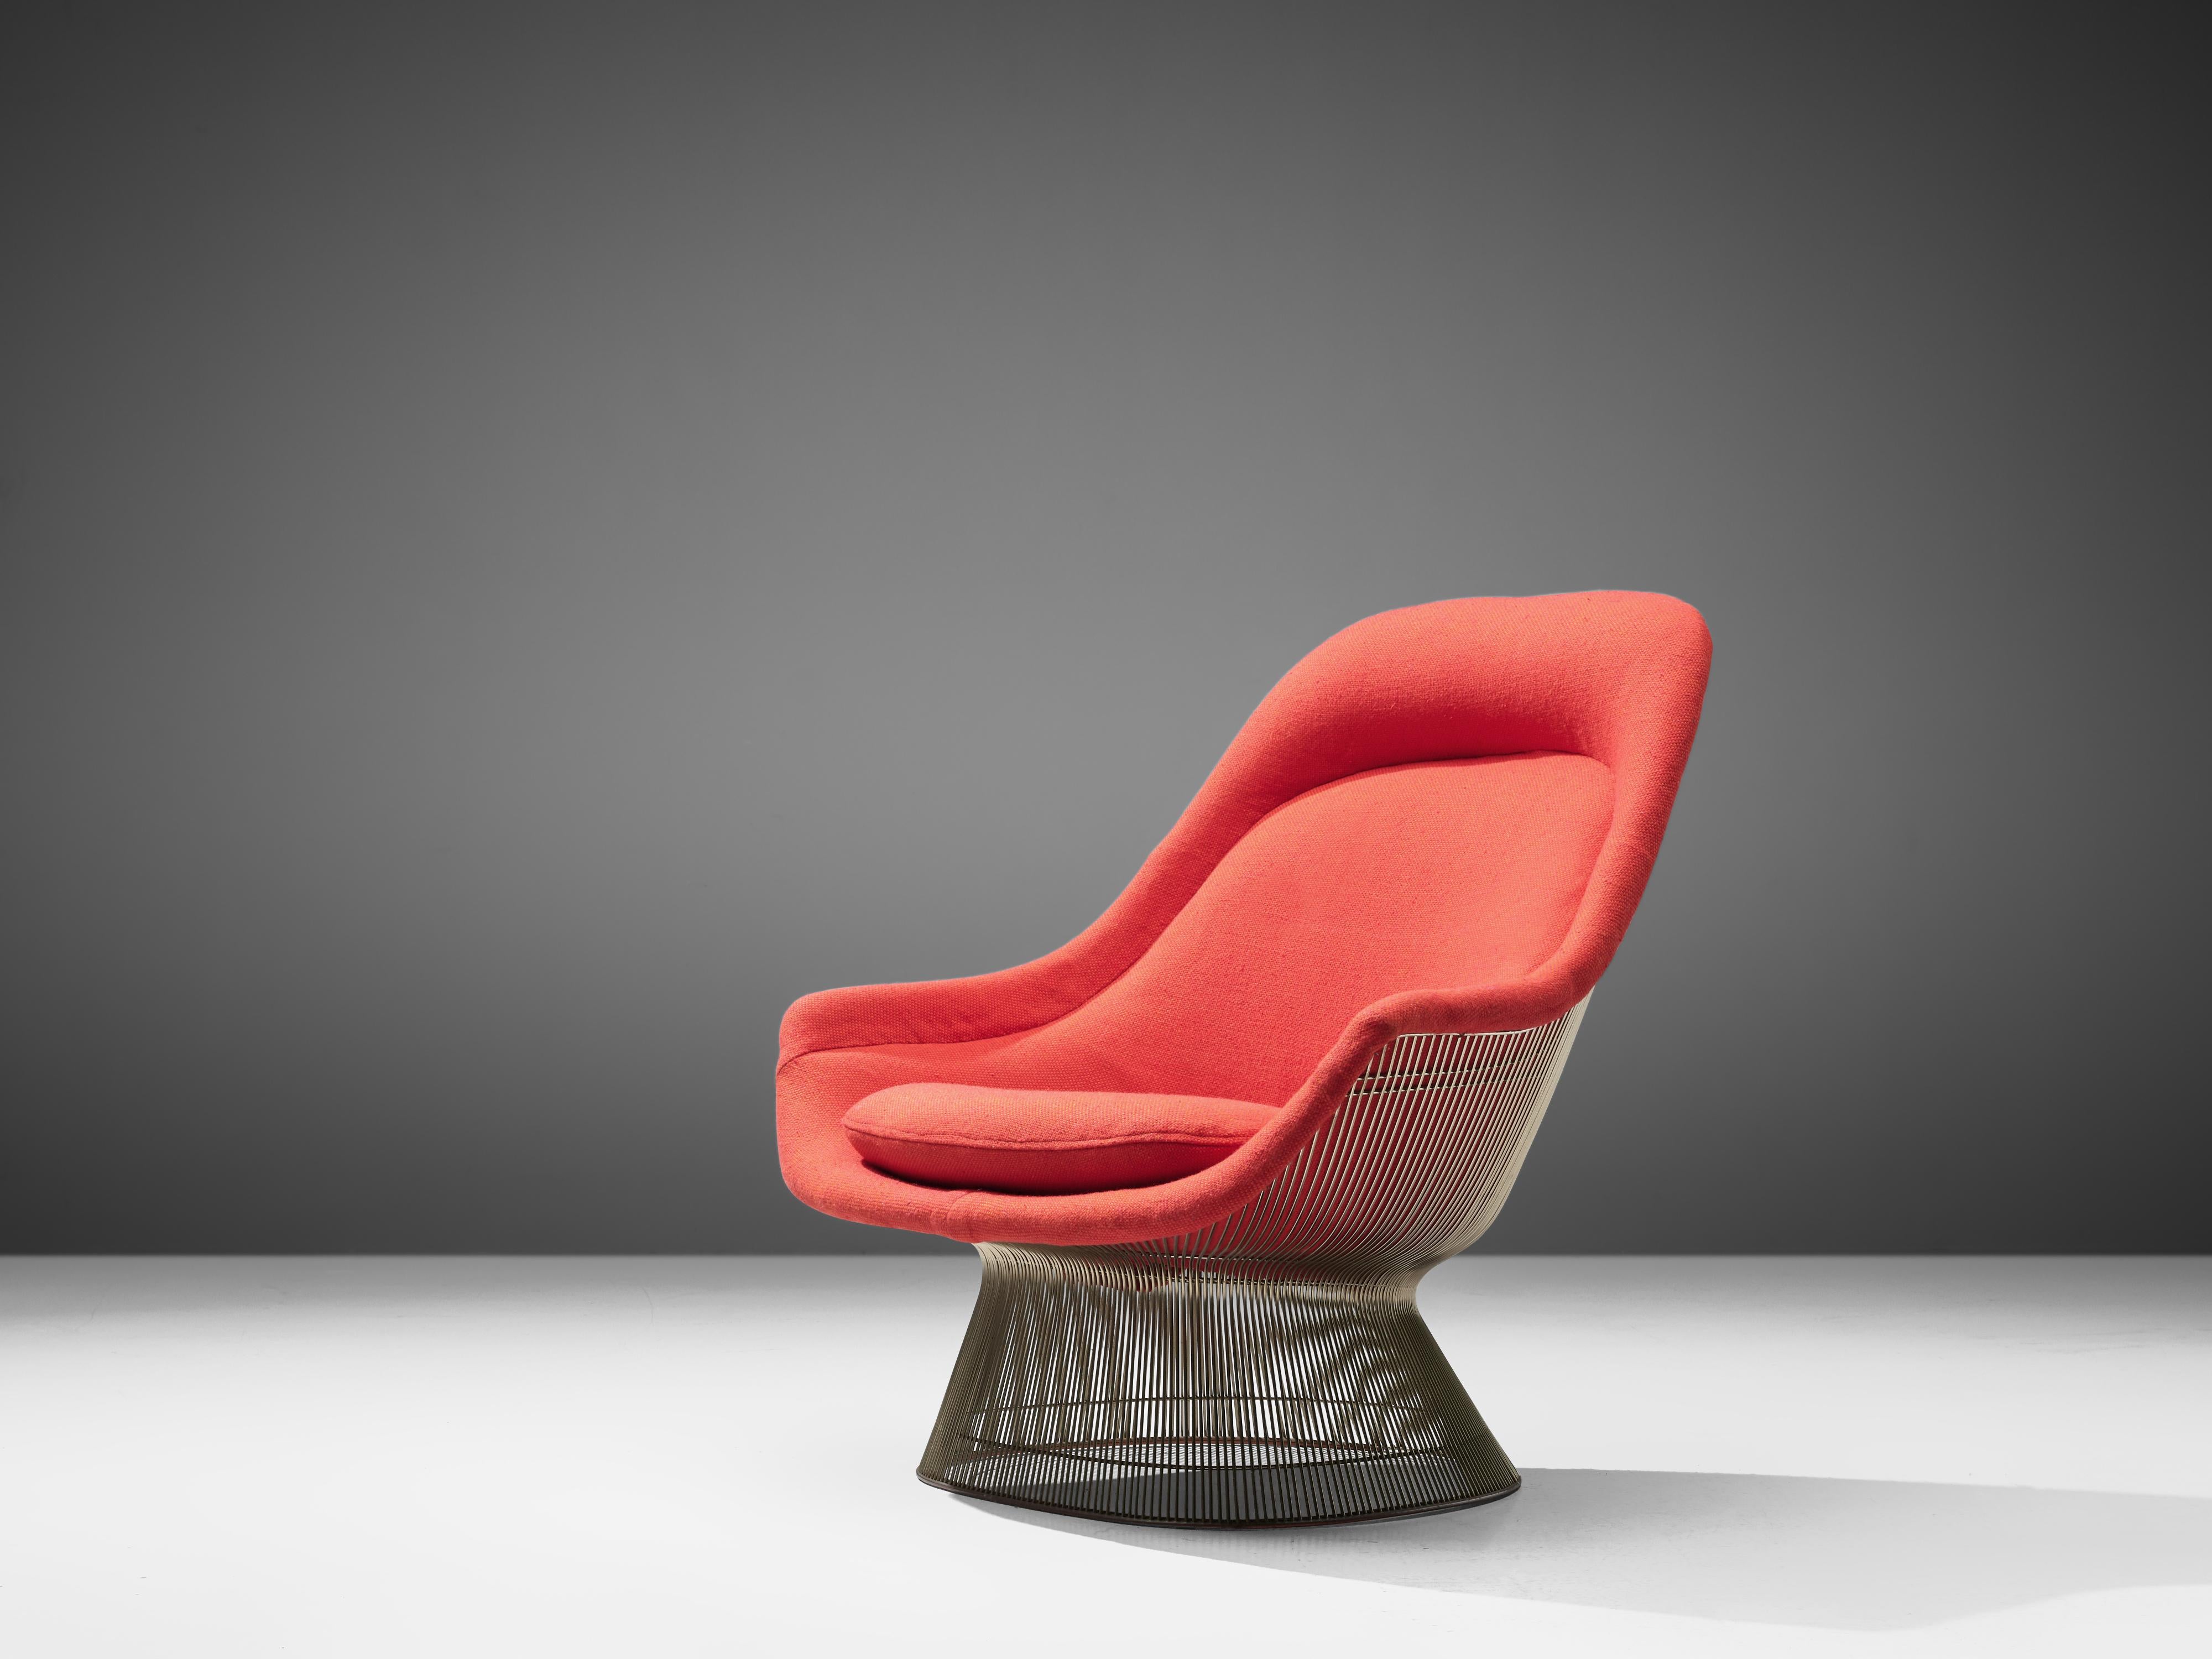 Warren Platner for Knoll, lounge chair 'model 1705', steel, red fabric, United States, 1966

This iconic red easy chair by Warren Platner is created by welding curved steel rods to circular and semi-circular frames, simultaneously serving as